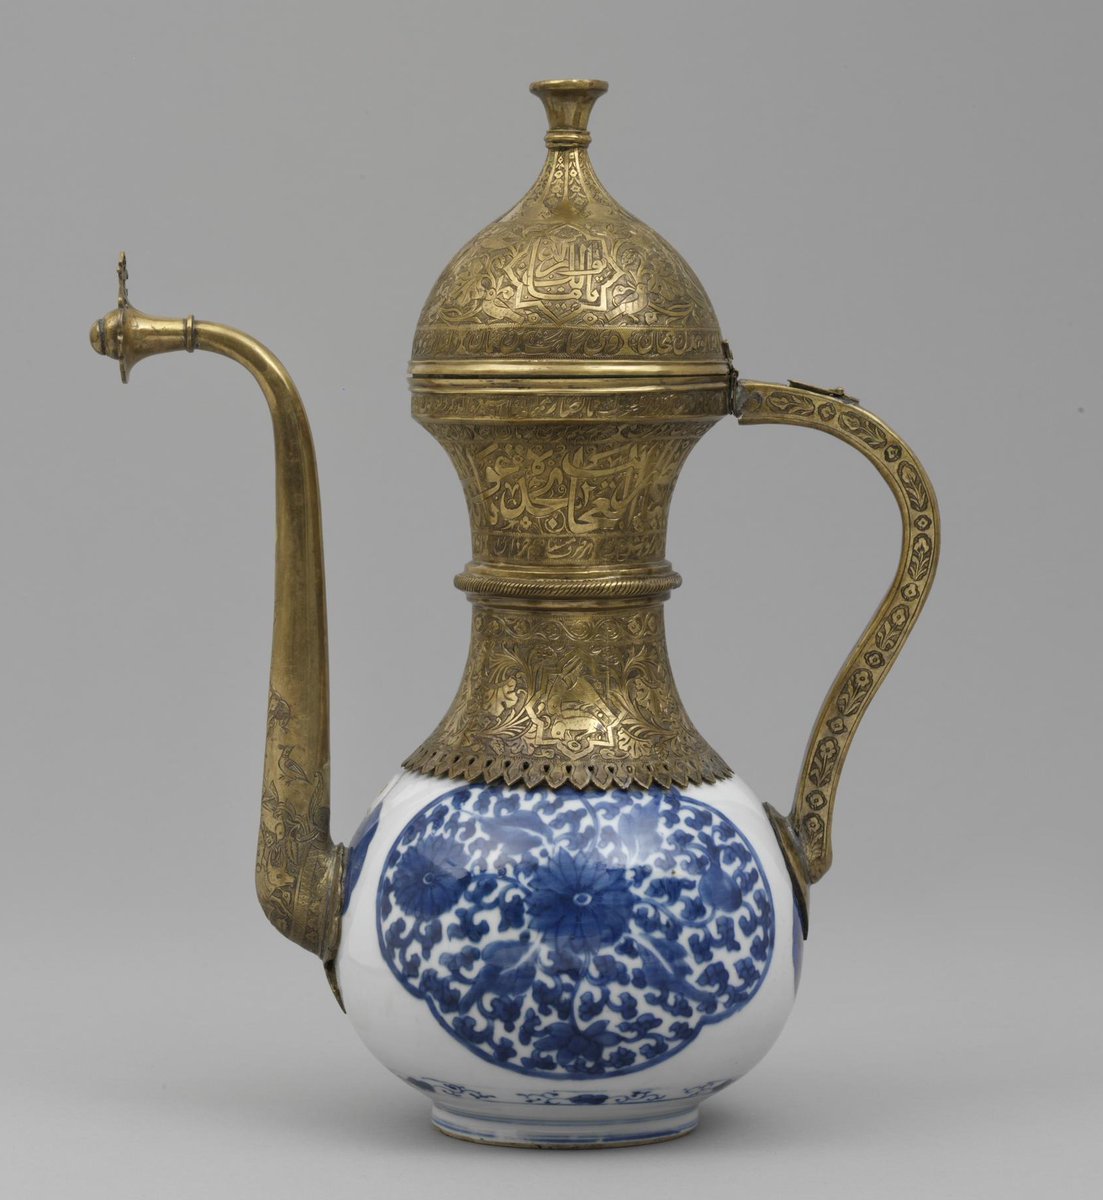 The heatwave in the UK this week got me thinking about how people kept cool in 19th-century Iran. There's one really interesting type of vessel which had a role in this, so here's a quick thread on ice cold drinks in pre-refrigerator Qajar Iran... [1]